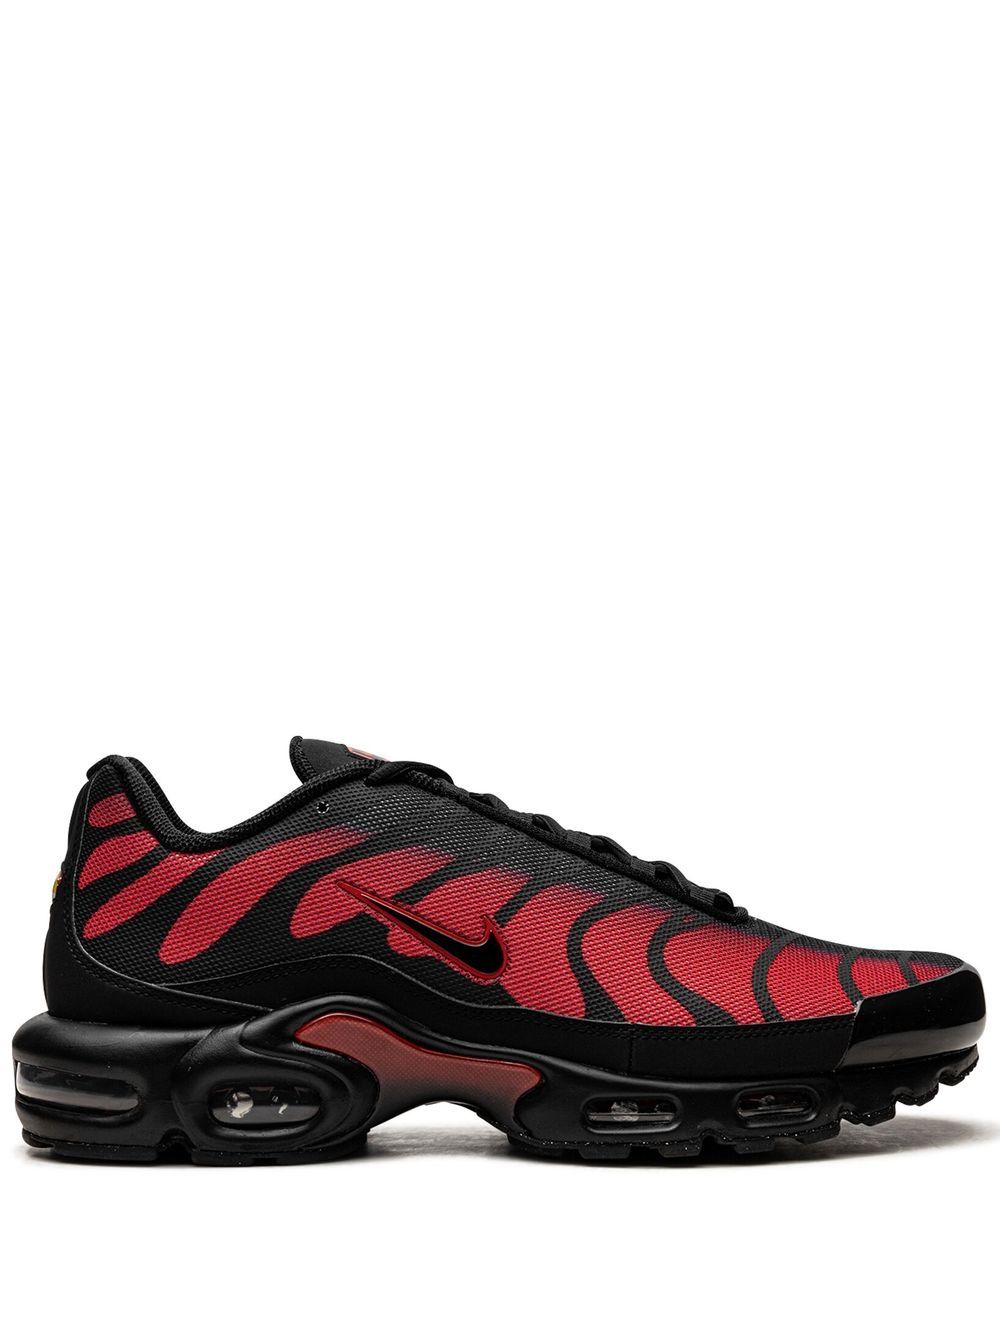 Nike Air Max Plus "Bred Reflective" sneakers - Blue von Nike